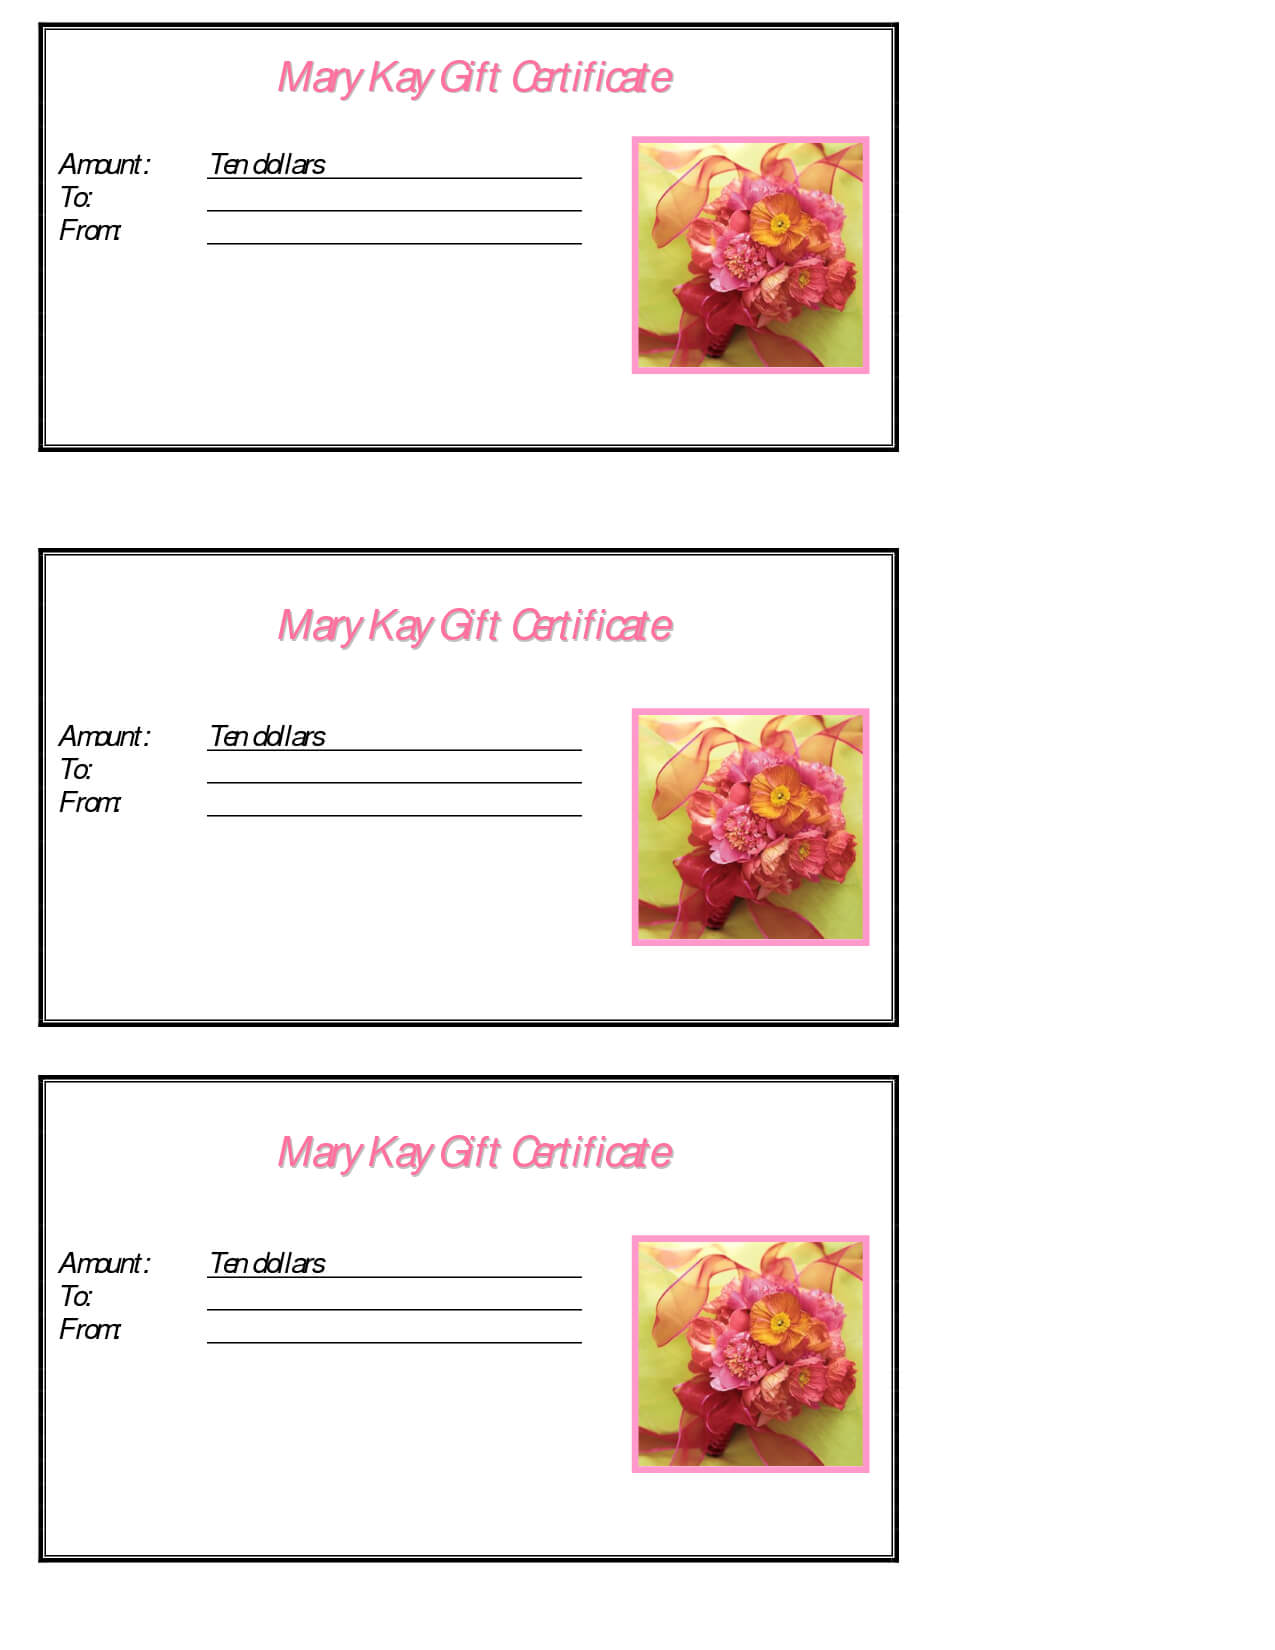 Mary Kay Gift Certificate Template This Is Your Index.html Within Mary Kay Gift Certificate Template